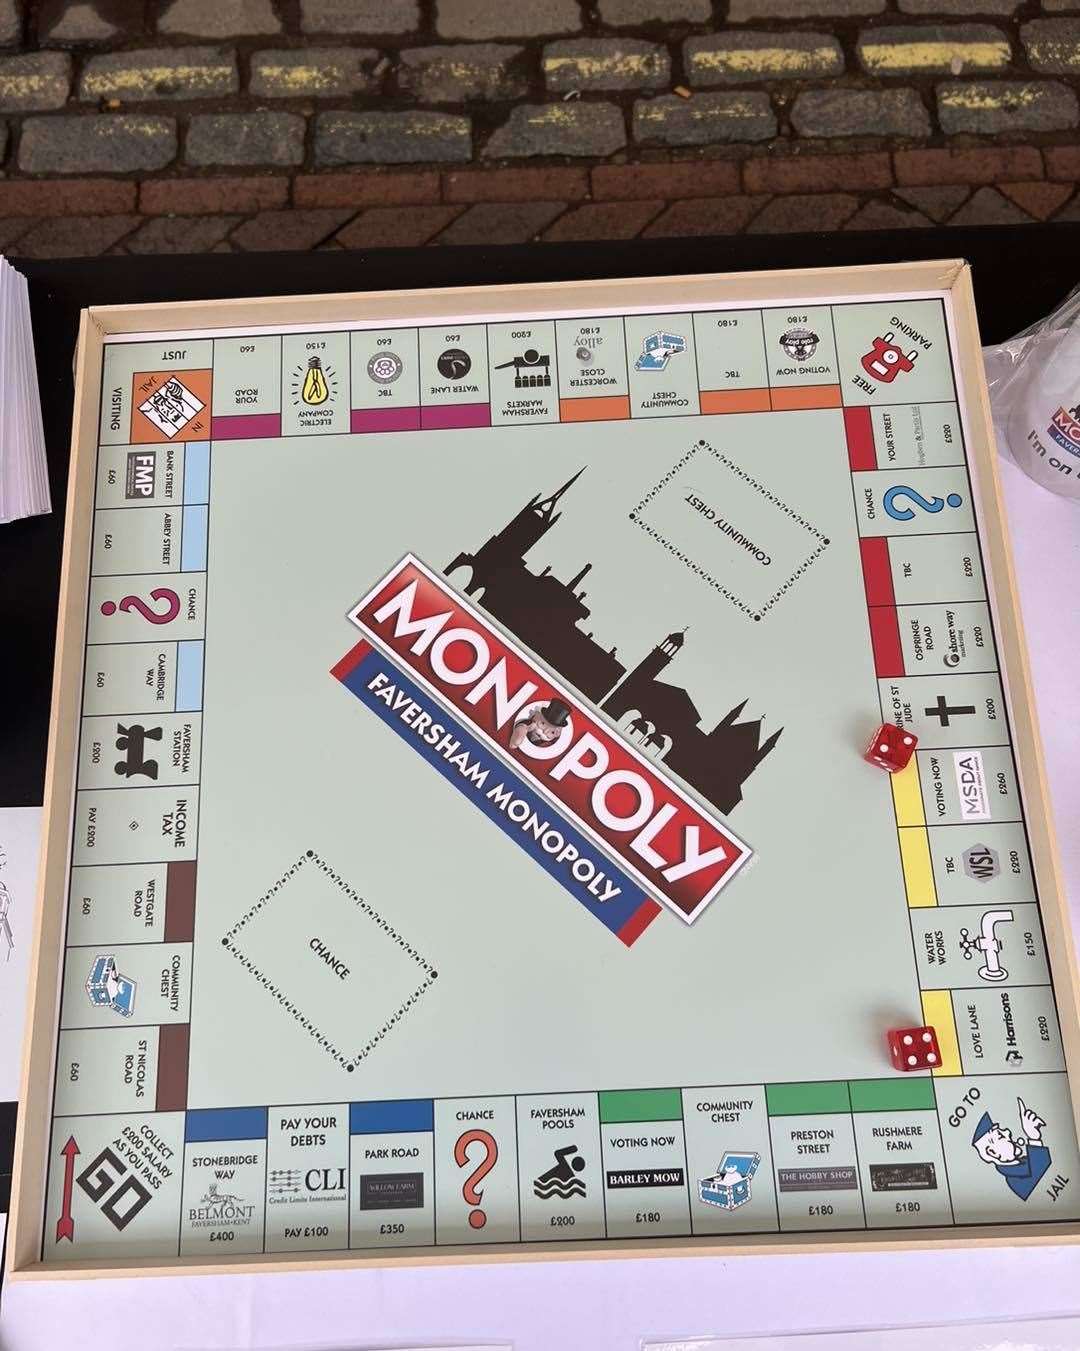 The current draft of the Faversham Monopoly board which is being finalised and set to be completed within the next few weeks before going off to manufacturers for release in autumn 2023. Picture: Faversham Monopoly